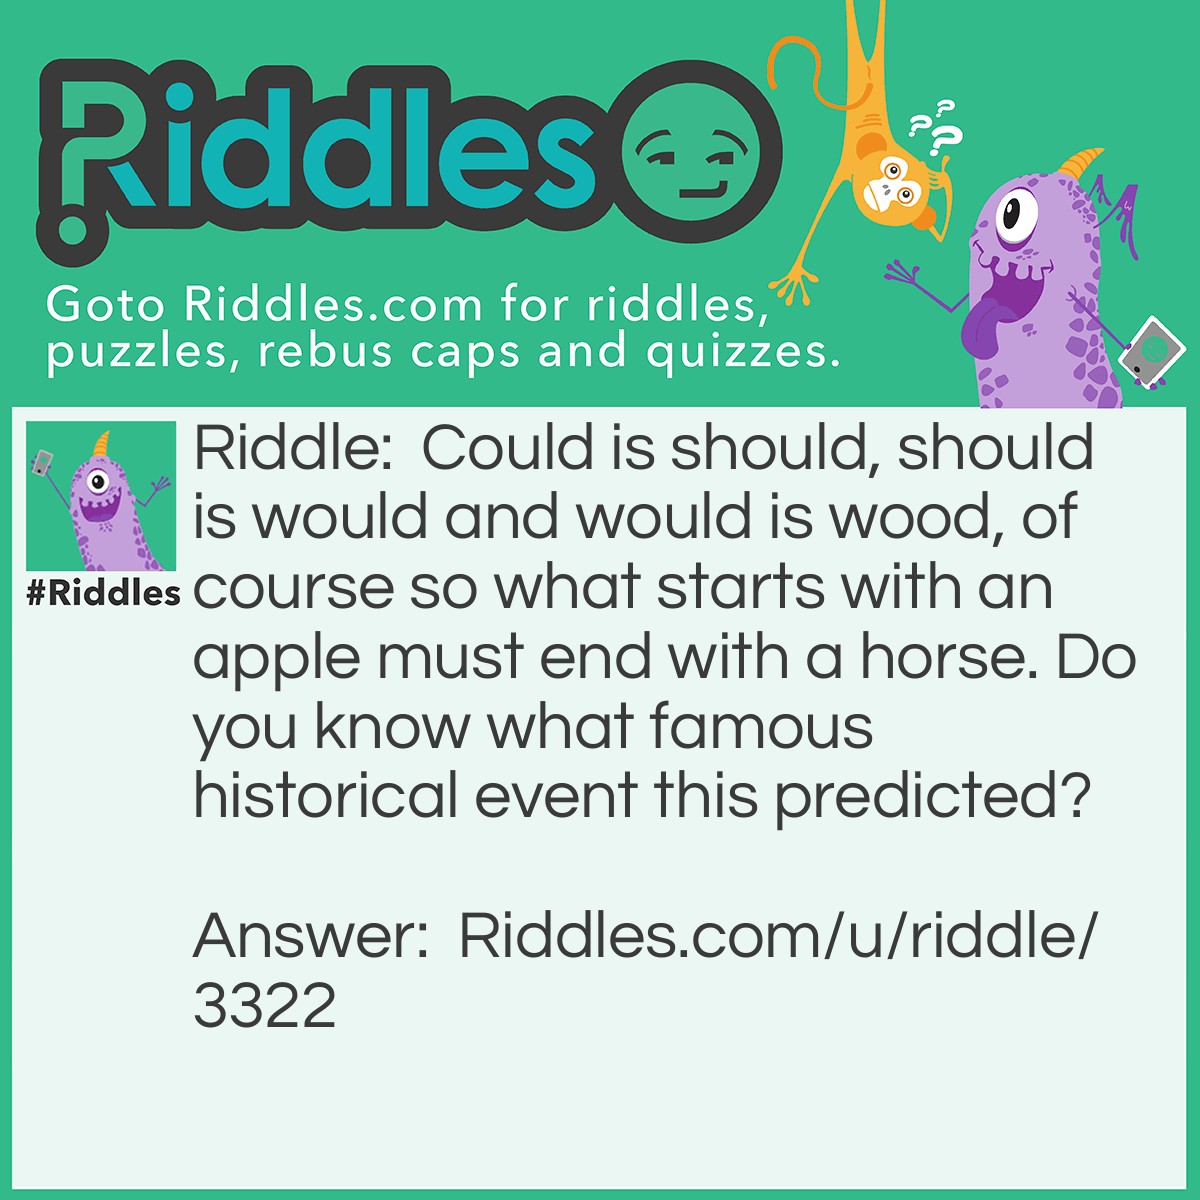 Riddle: Could is should, should is would and would is wood, of course so what starts with an apple must end with a horse. Do you know what famous historical event this predicted? Answer: Ne riddle, and I don't know the answer.